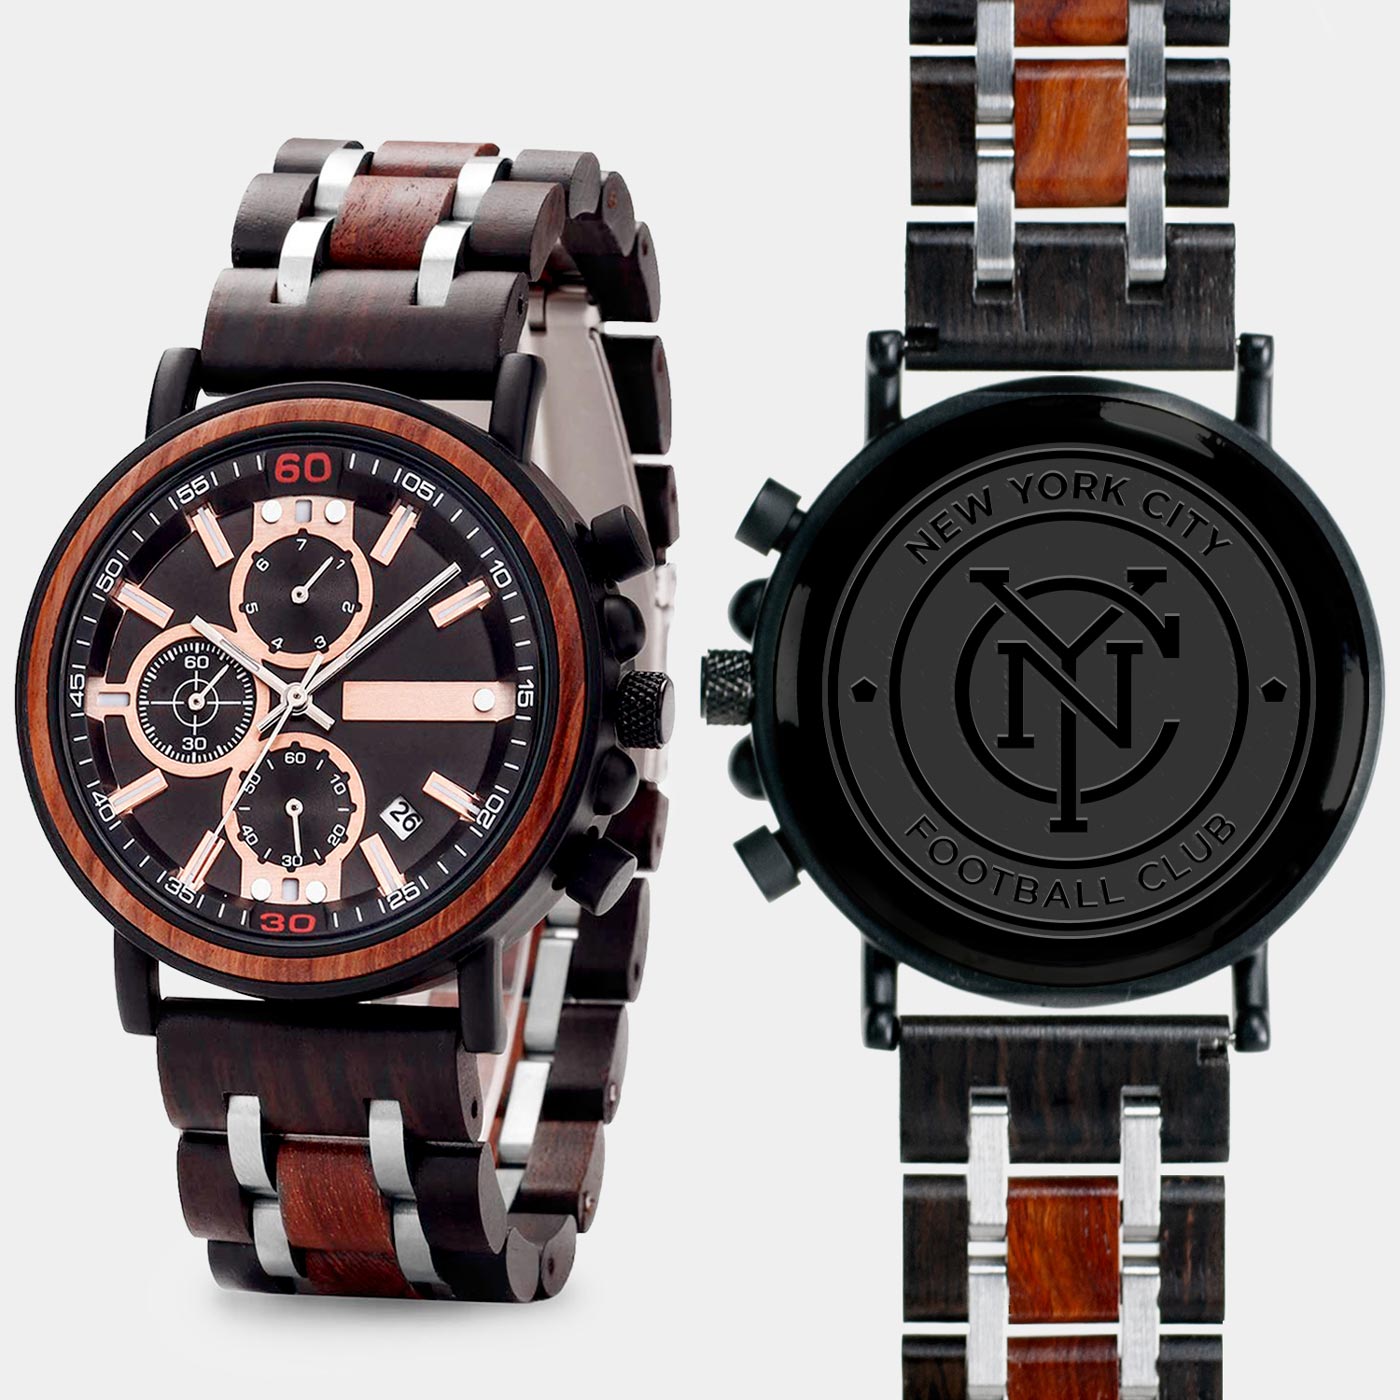 New York City FC Mens Wrist Watch  - Personalized New York City FC Mens Watches - Custom Gifts For Him, Birthday Gifts, Gift For Dad - Best 2022 New York City FC Christmas Gifts - Black 45mm MLS Wood Watch